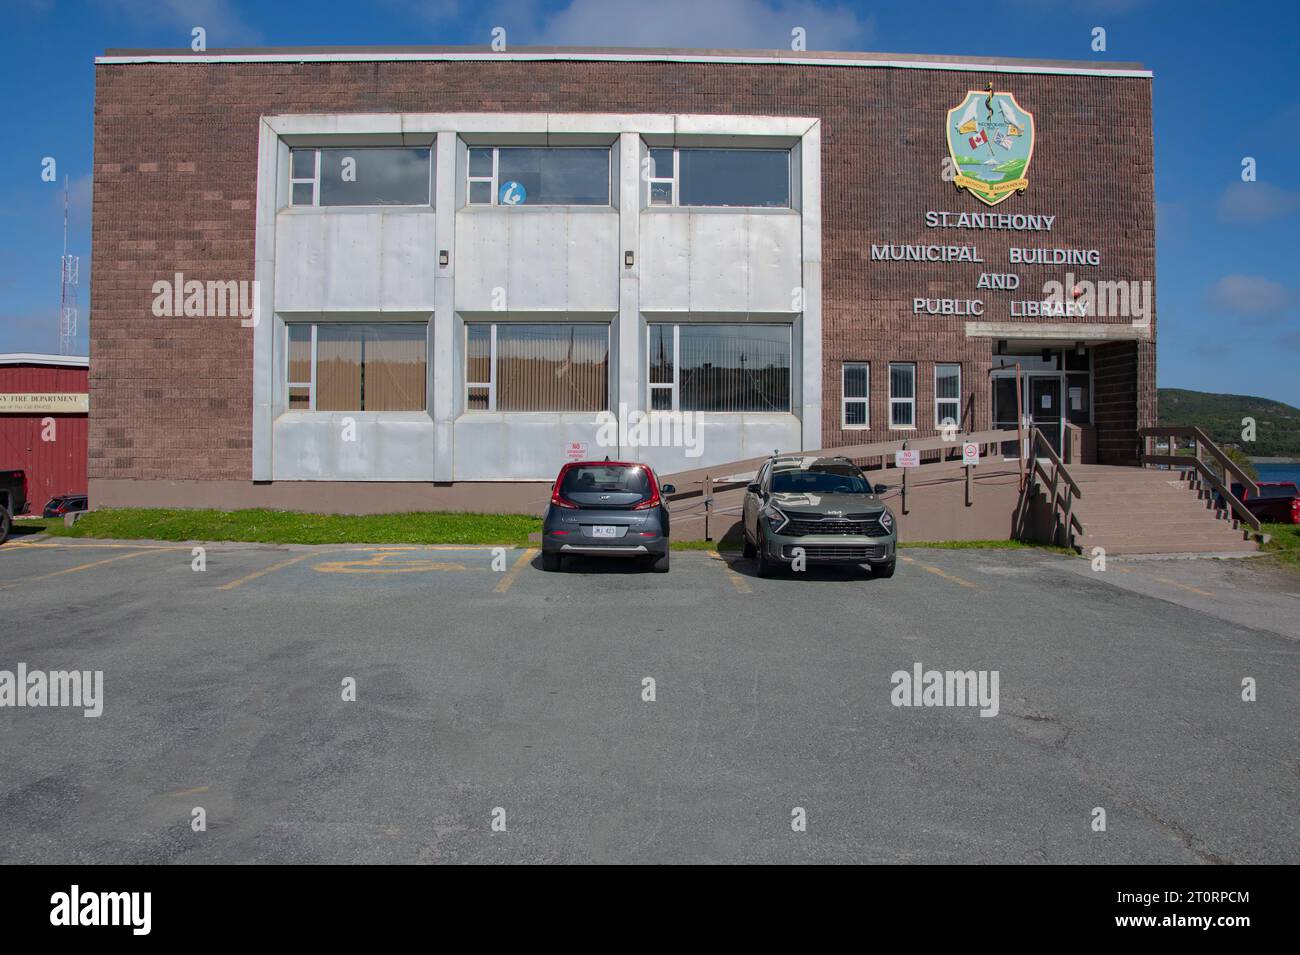 St. Anthony municipal building and library in Newfoundland & Labrador, Canada Stock Photo